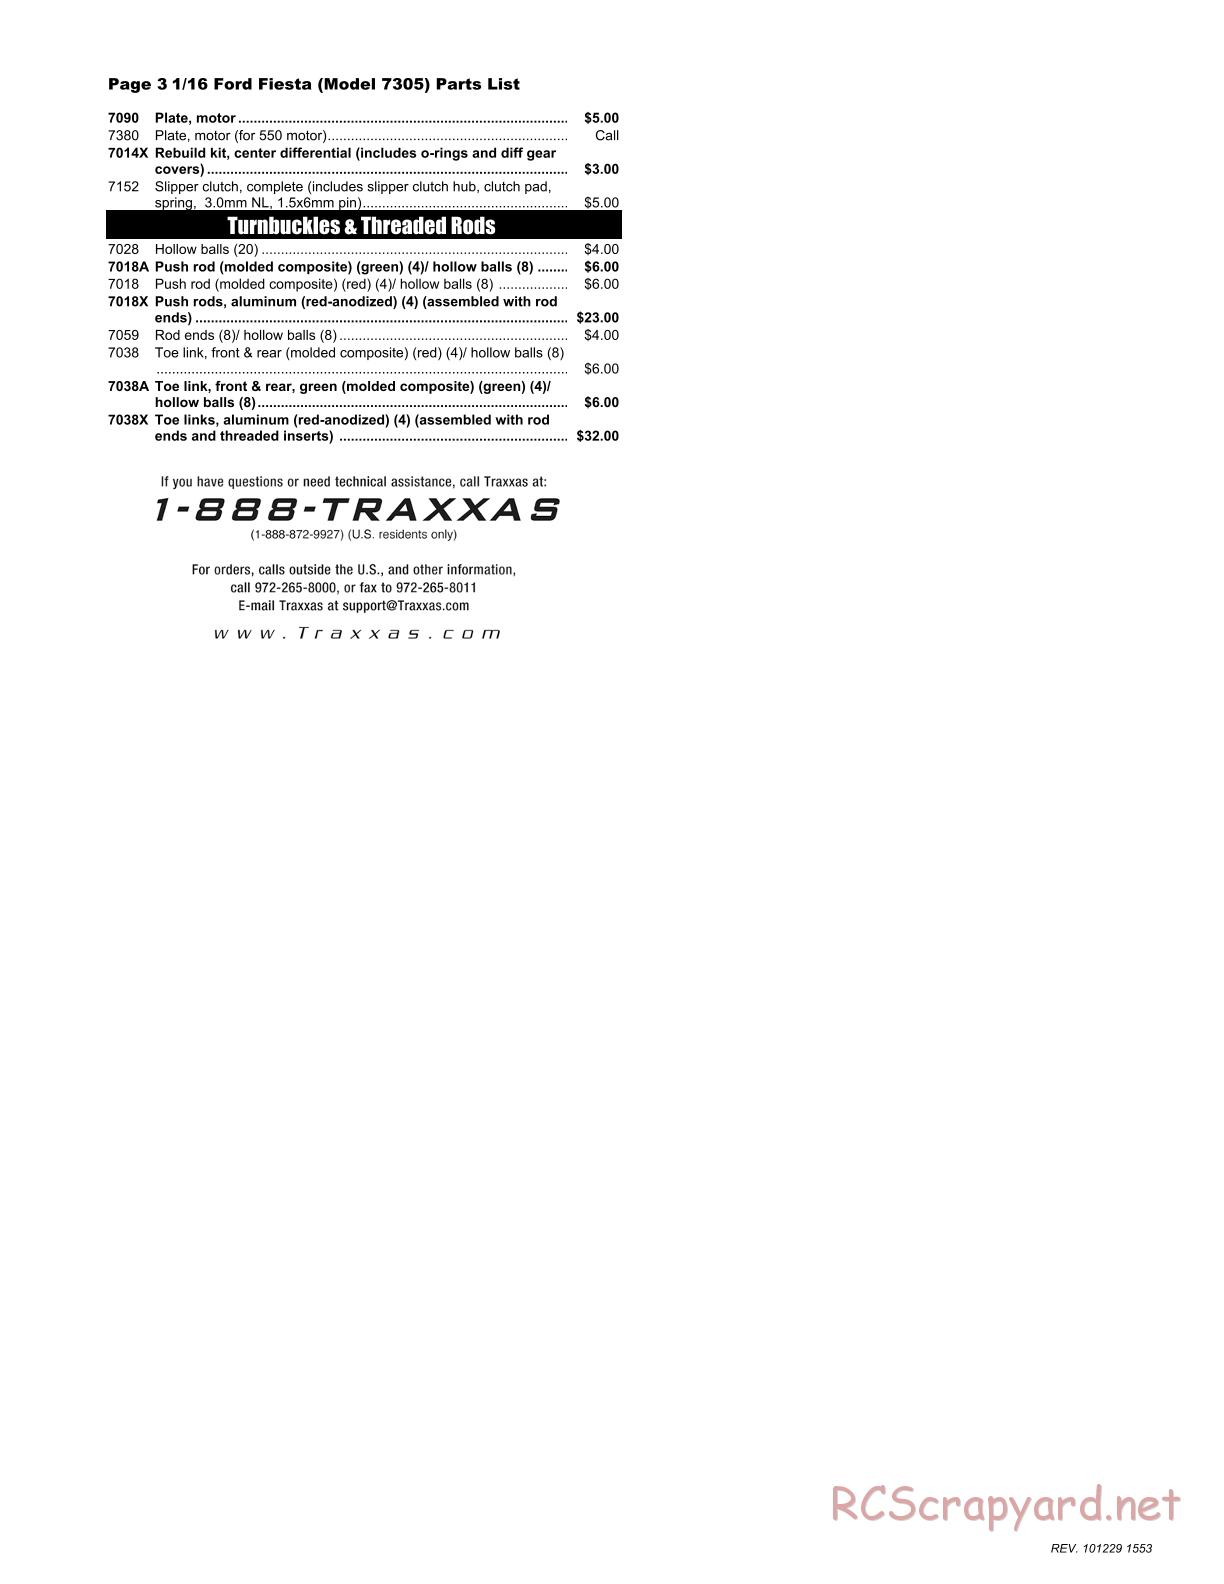 Traxxas - 1/16 Ford Fiesta (2011) - Parts List - Page 3